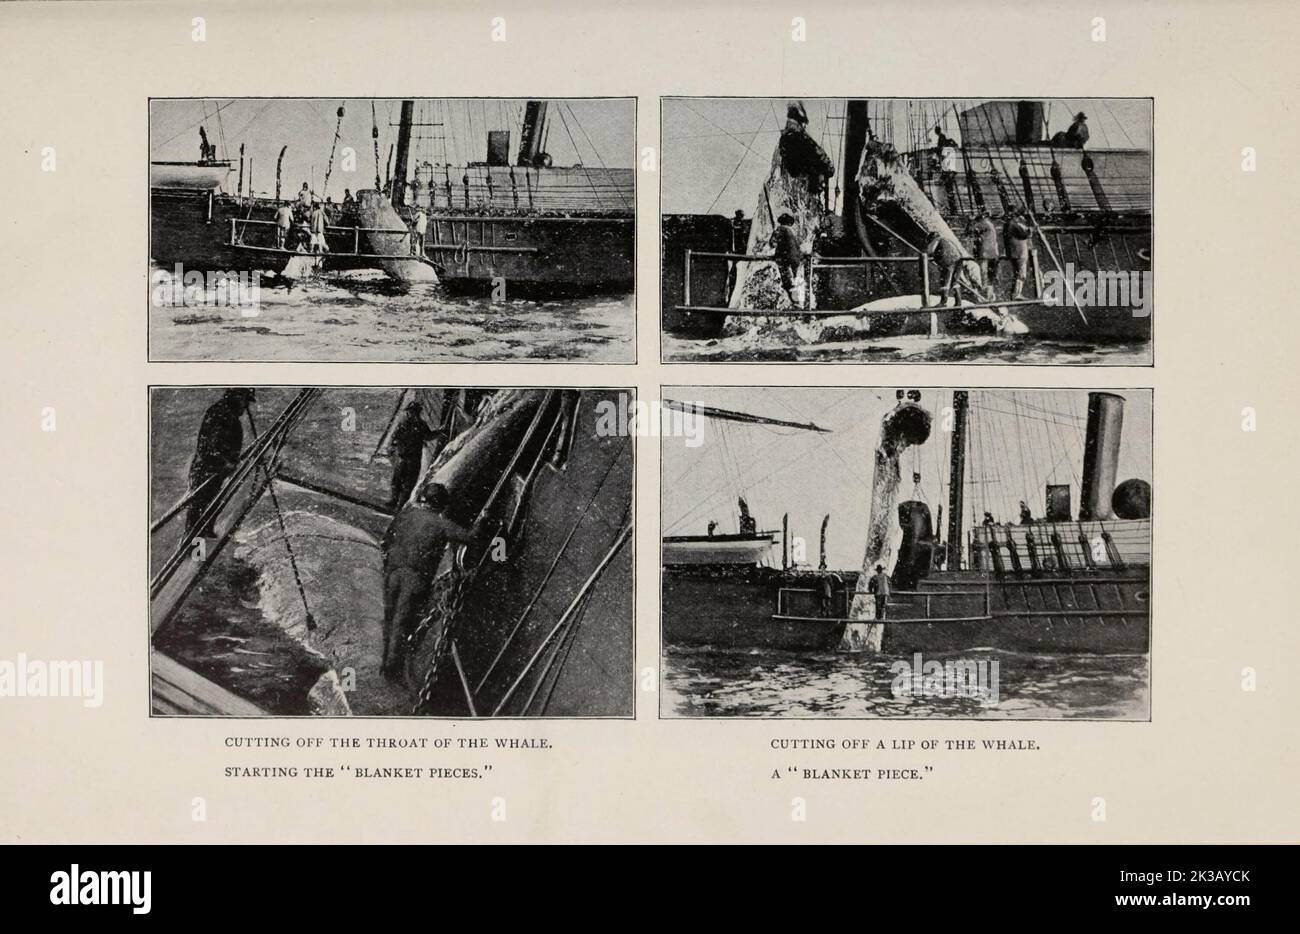 Butchering a whale on a whaler ship from the Article The Whaling Industry By Herbert L. Aldrich from The Engineering Magazine DEVOTED TO INDUSTRIAL PROGRESS Volume VIII April to September, 1895 NEW YORK The Engineering Magazine Co Stock Photo